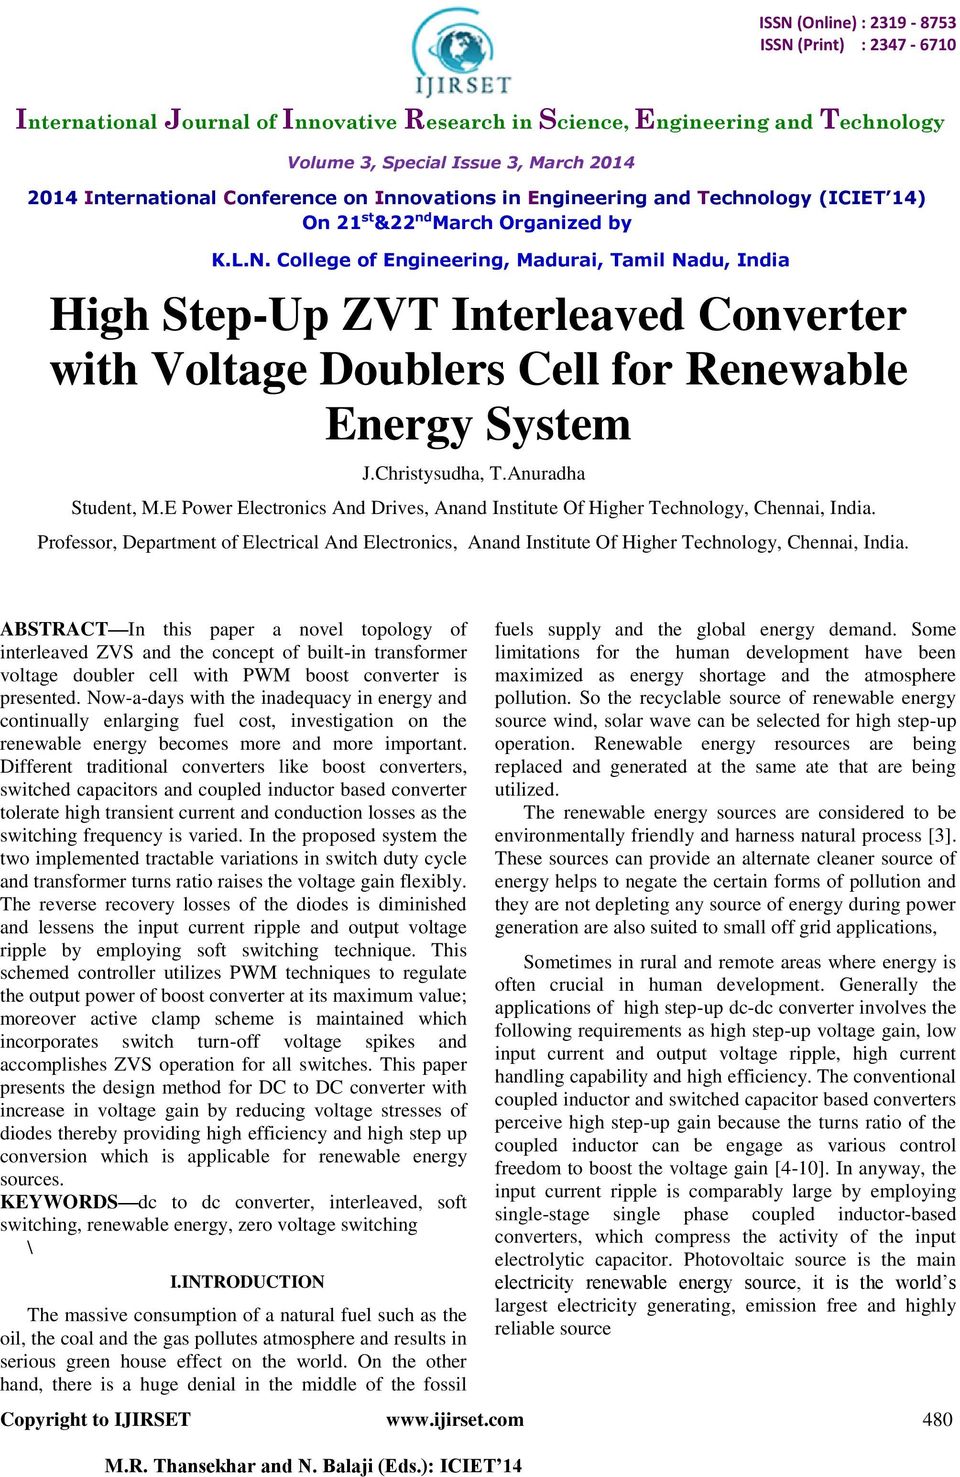 College of Engineering, Madurai, Tamil Nadu, India High Step-Up ZVT Interleaved Converter with Voltage Doublers Cell for Renewable Energy System J.Christysudha, T.Anuradha Student, M.